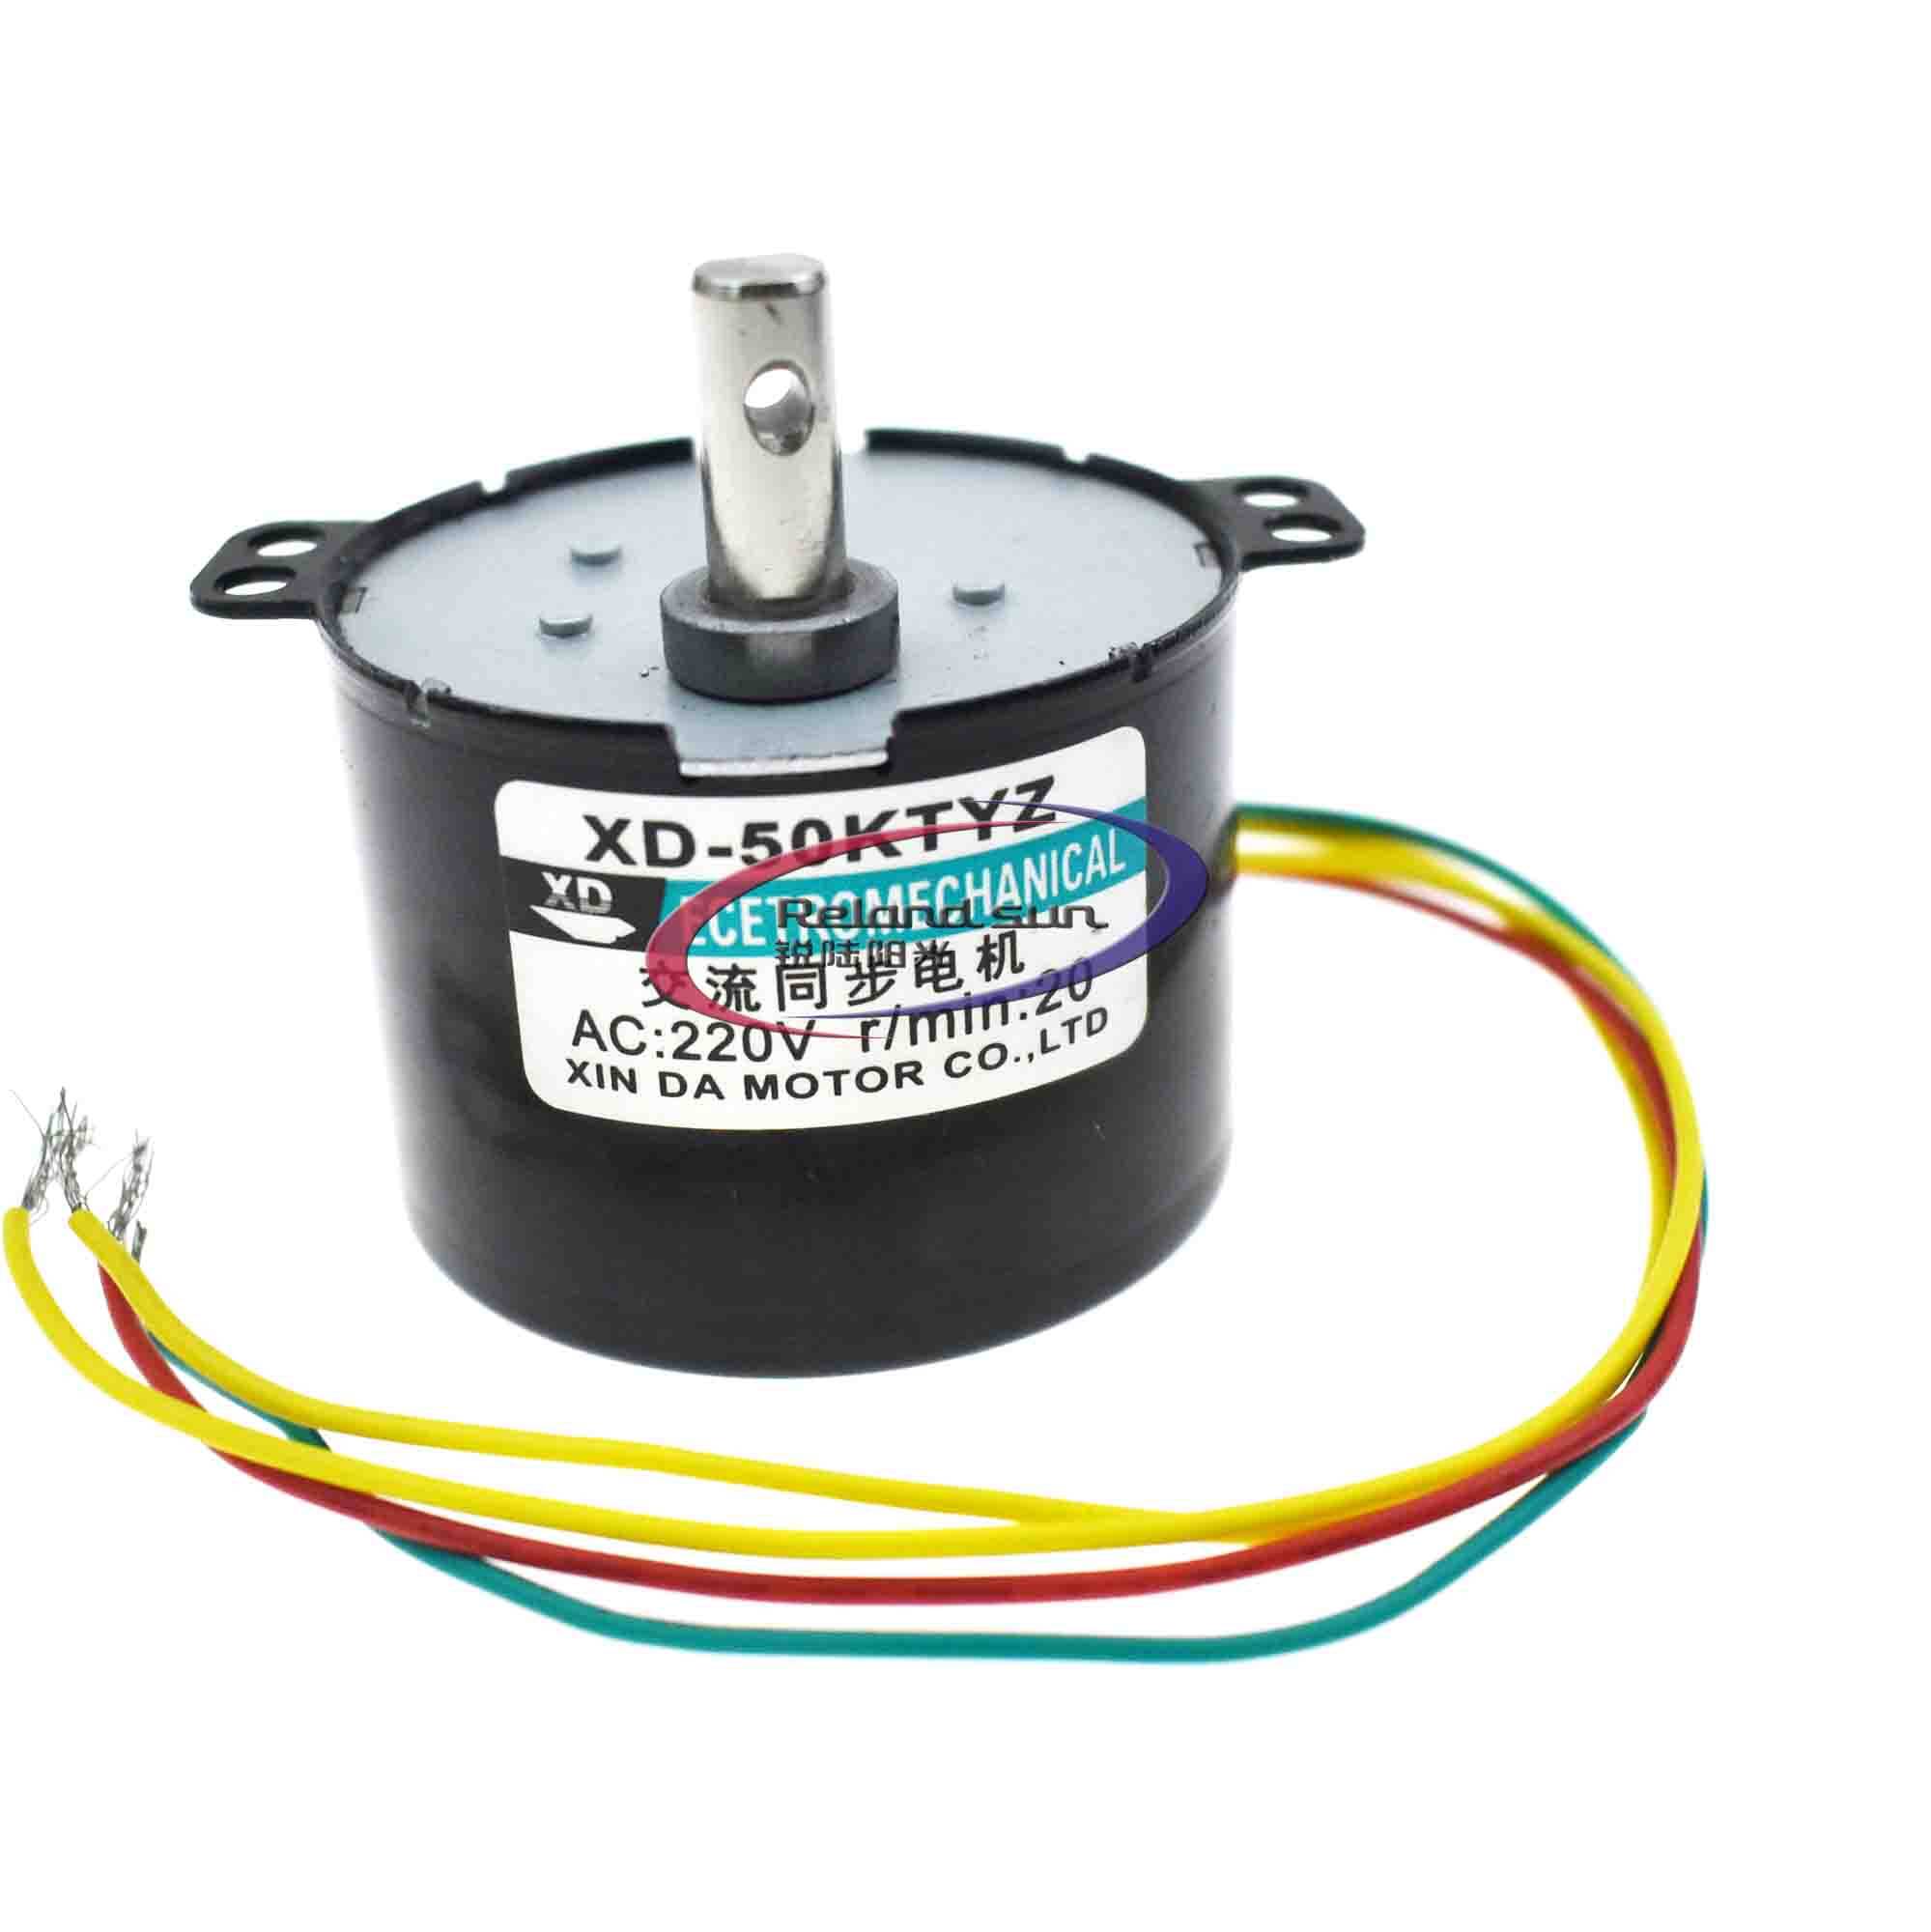 AC220V 10W 0.5A 2.5/20RPM Permanent Magnet Synchronous Motor CW/CCW 